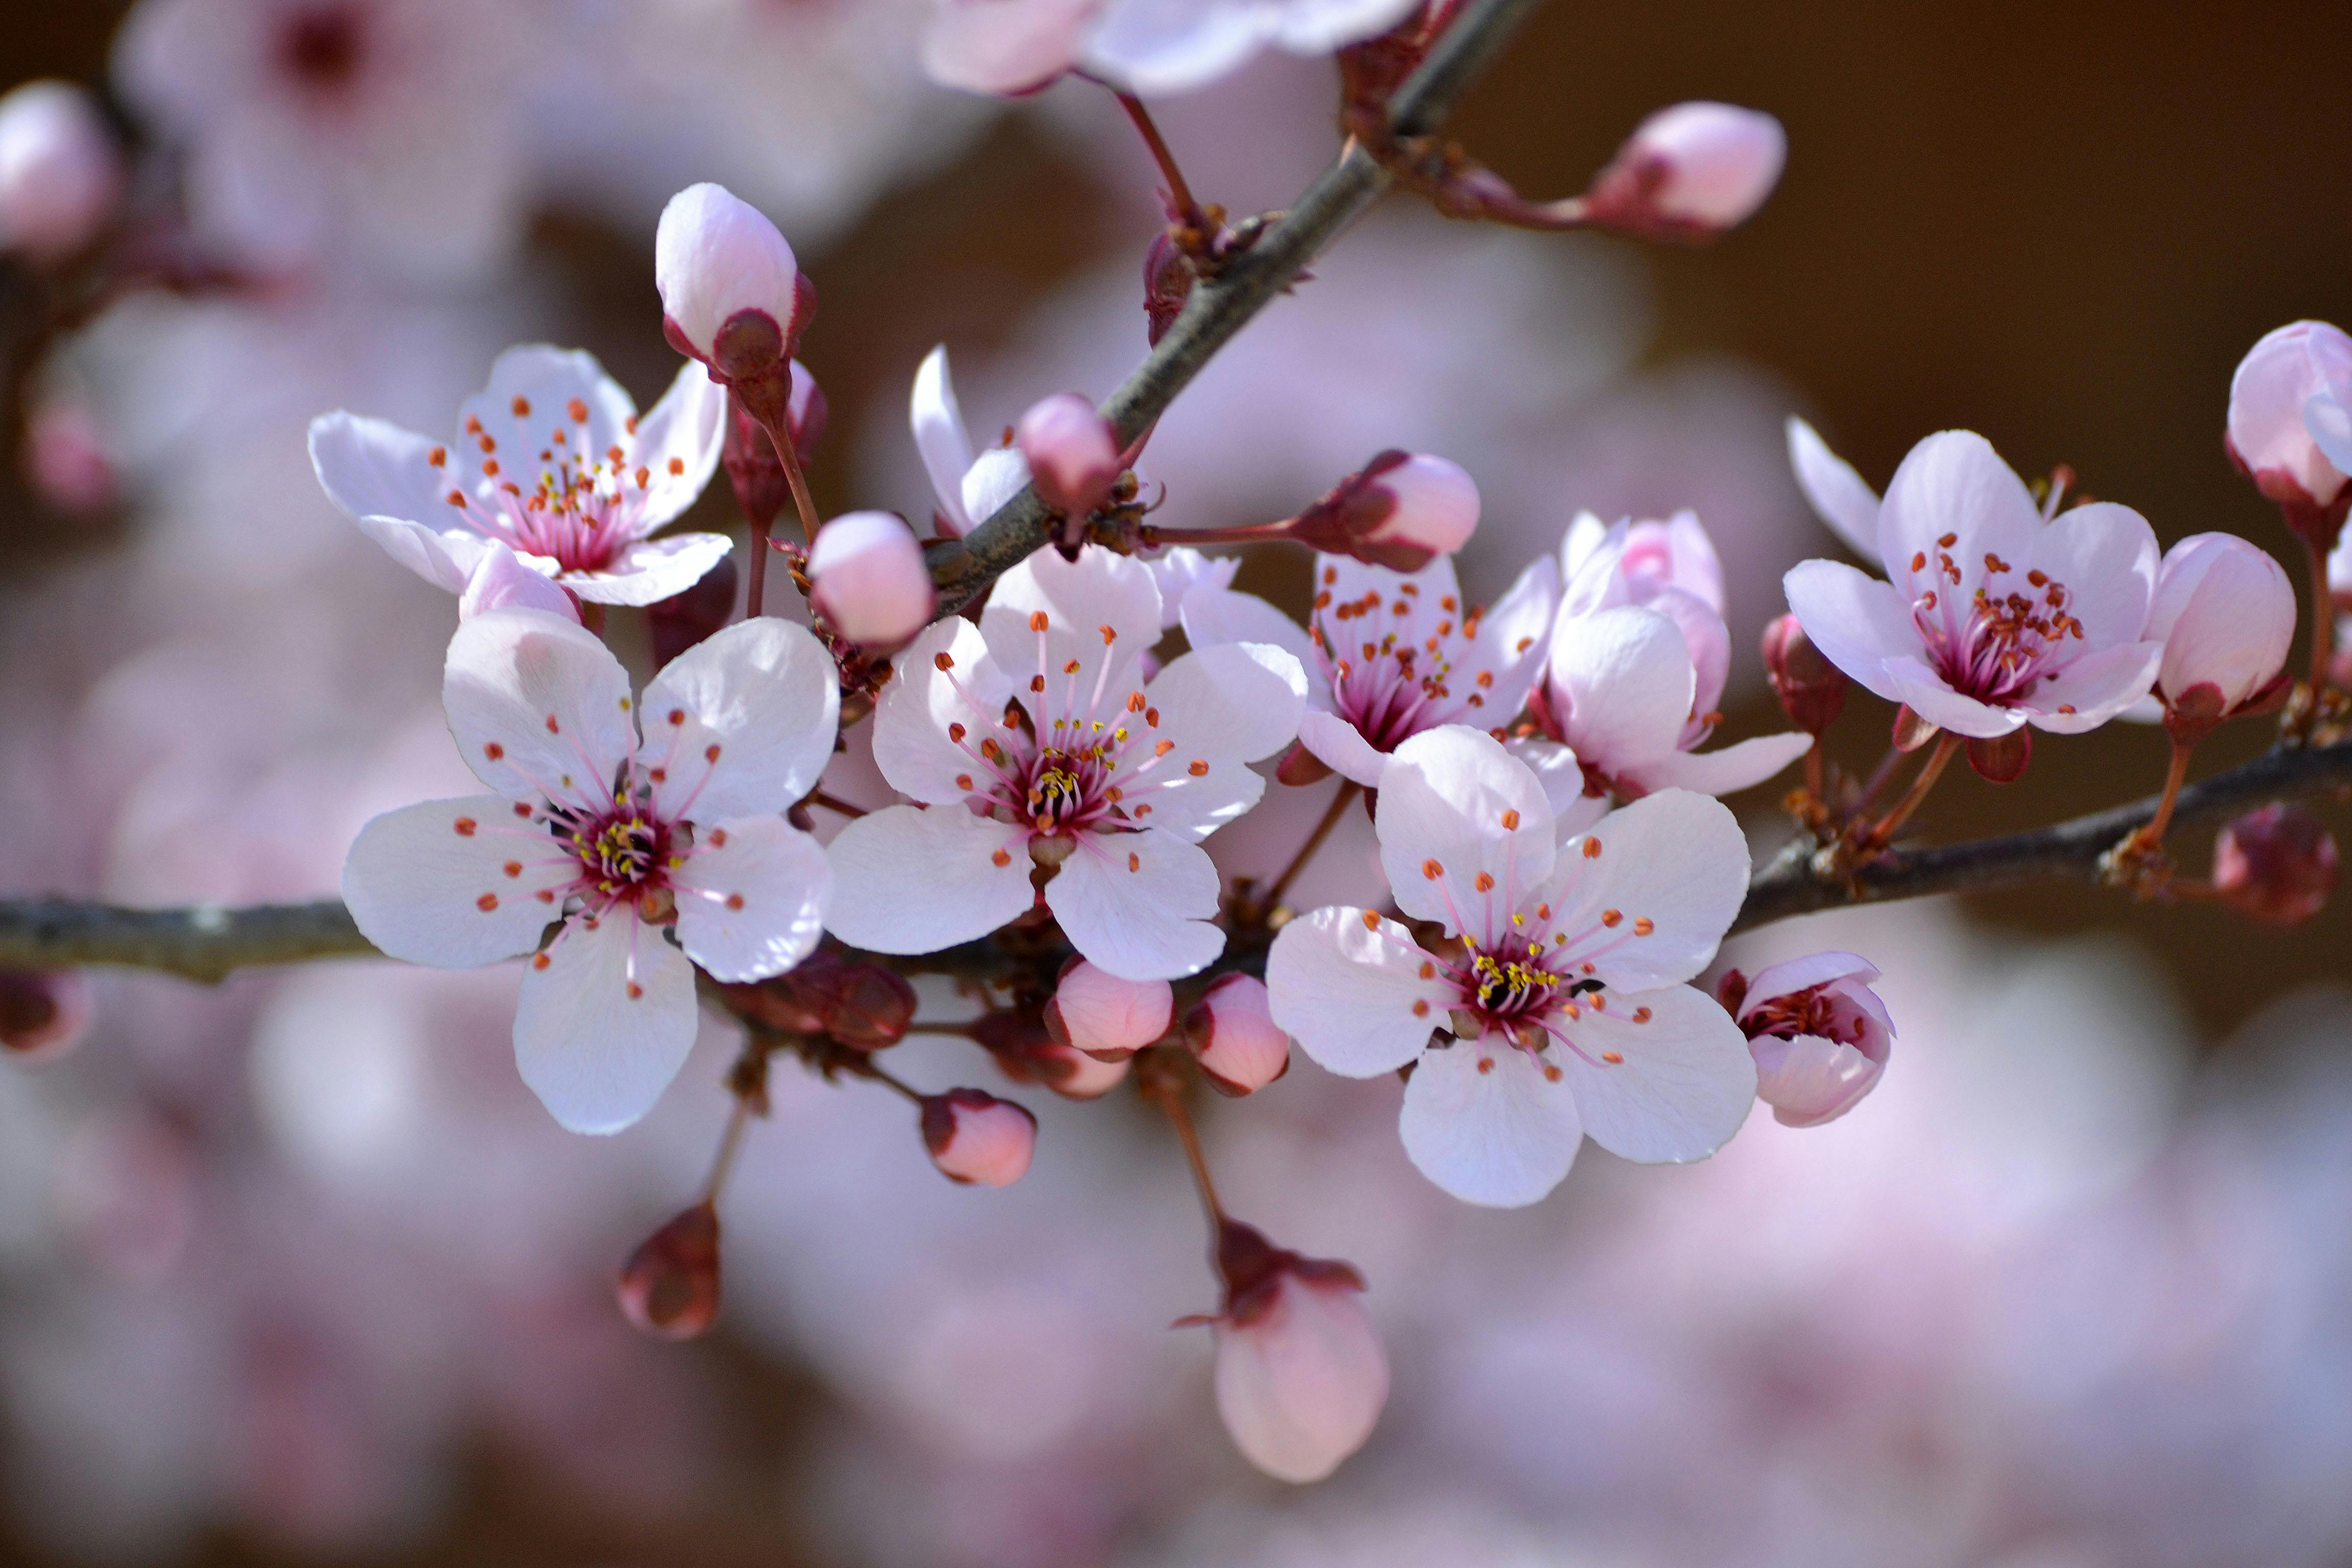  Pink Cherry Blossom  In Close Up Photography  Free Stock Photo